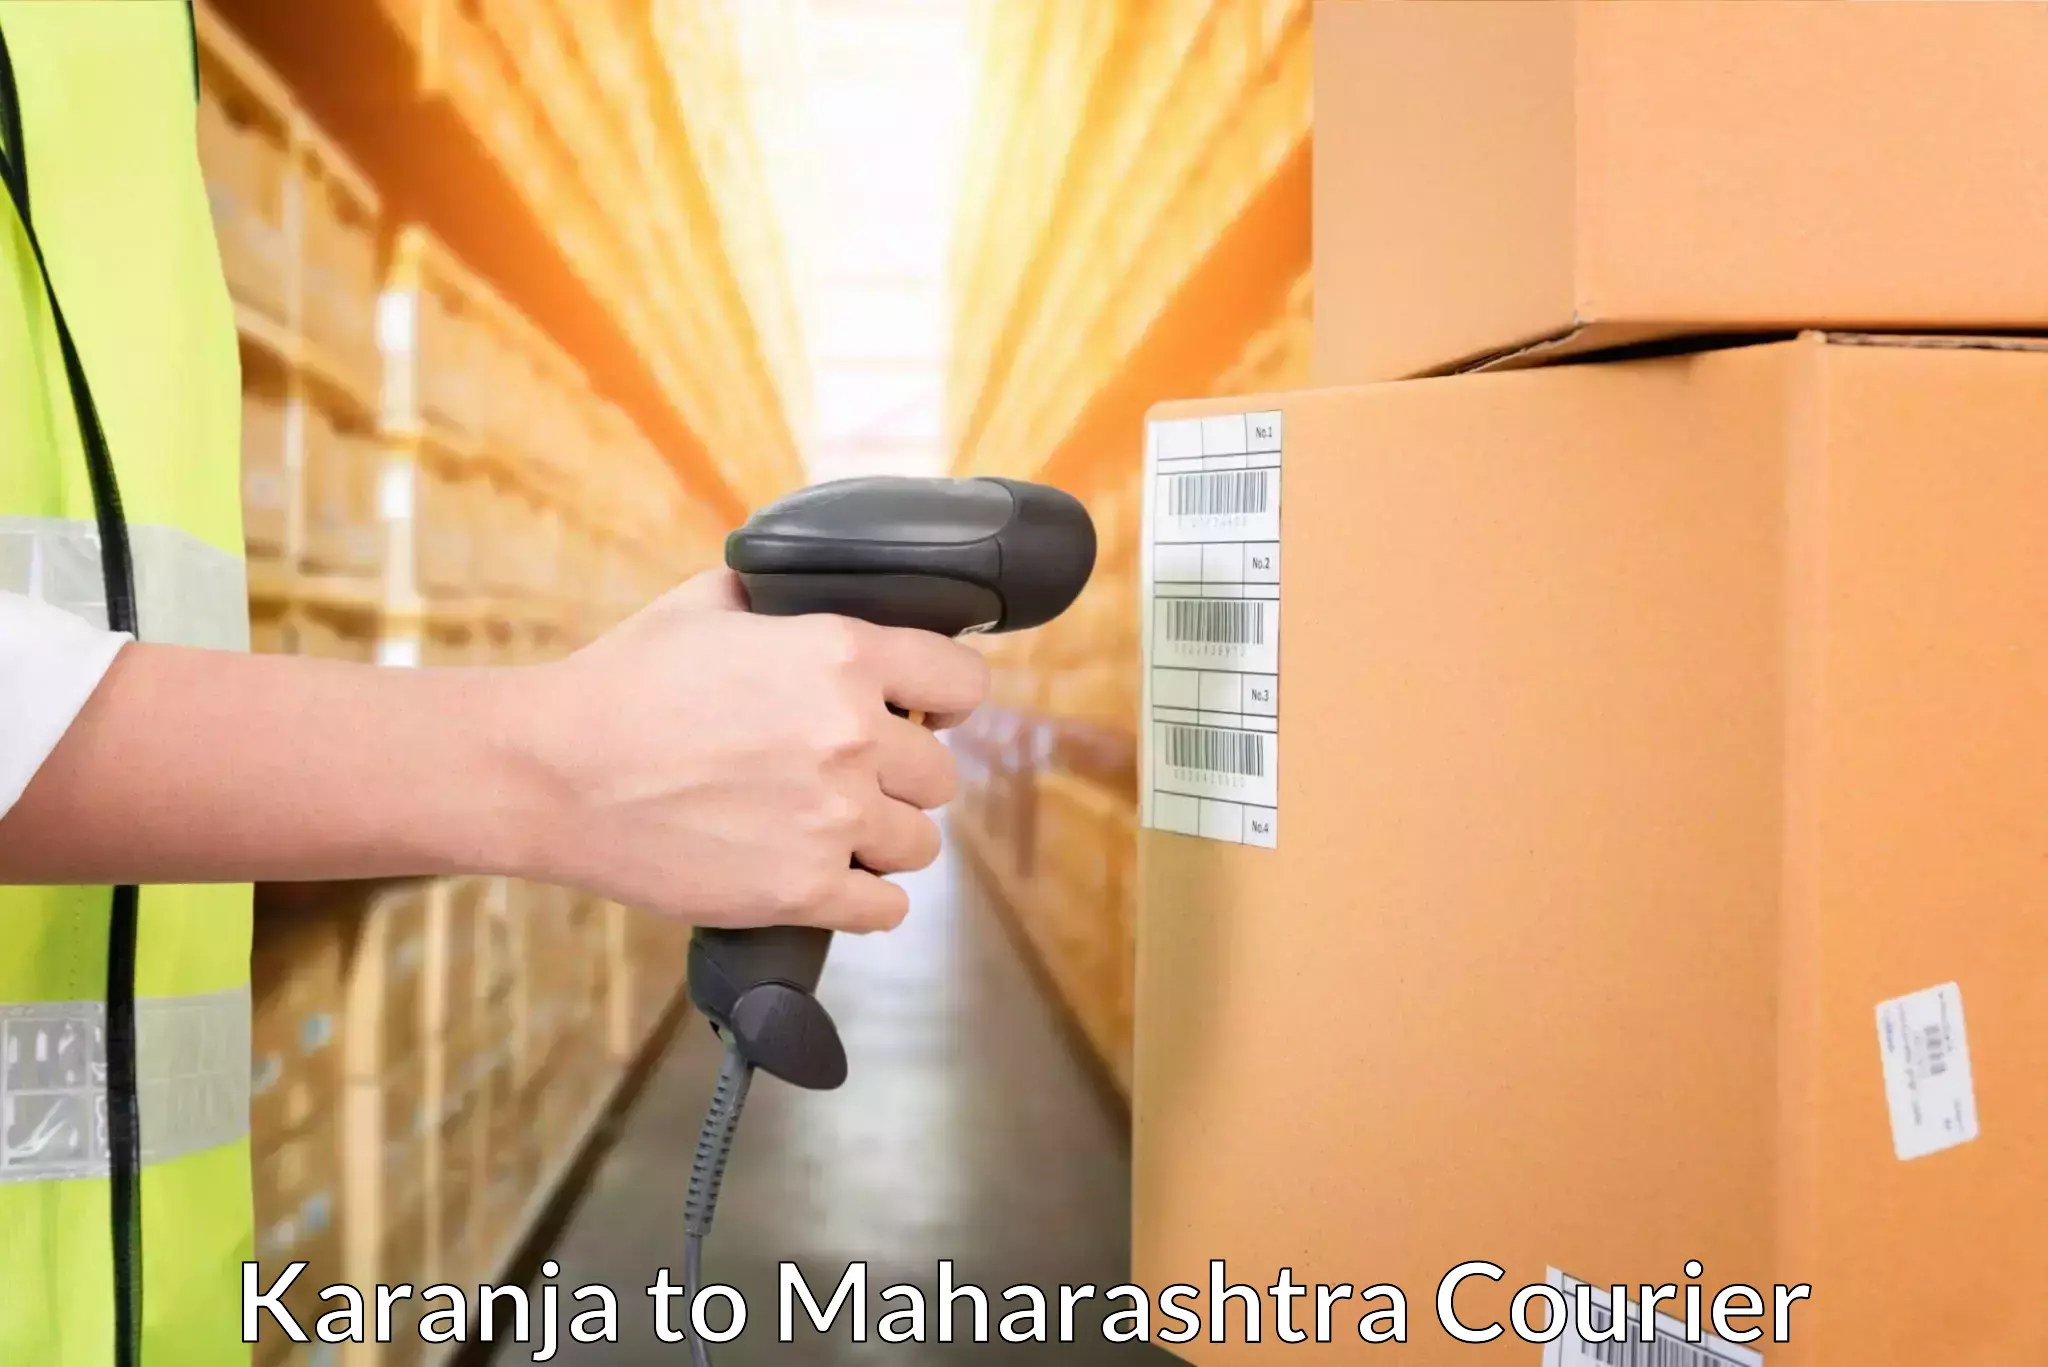 On-call courier service in Karanja to Pachora